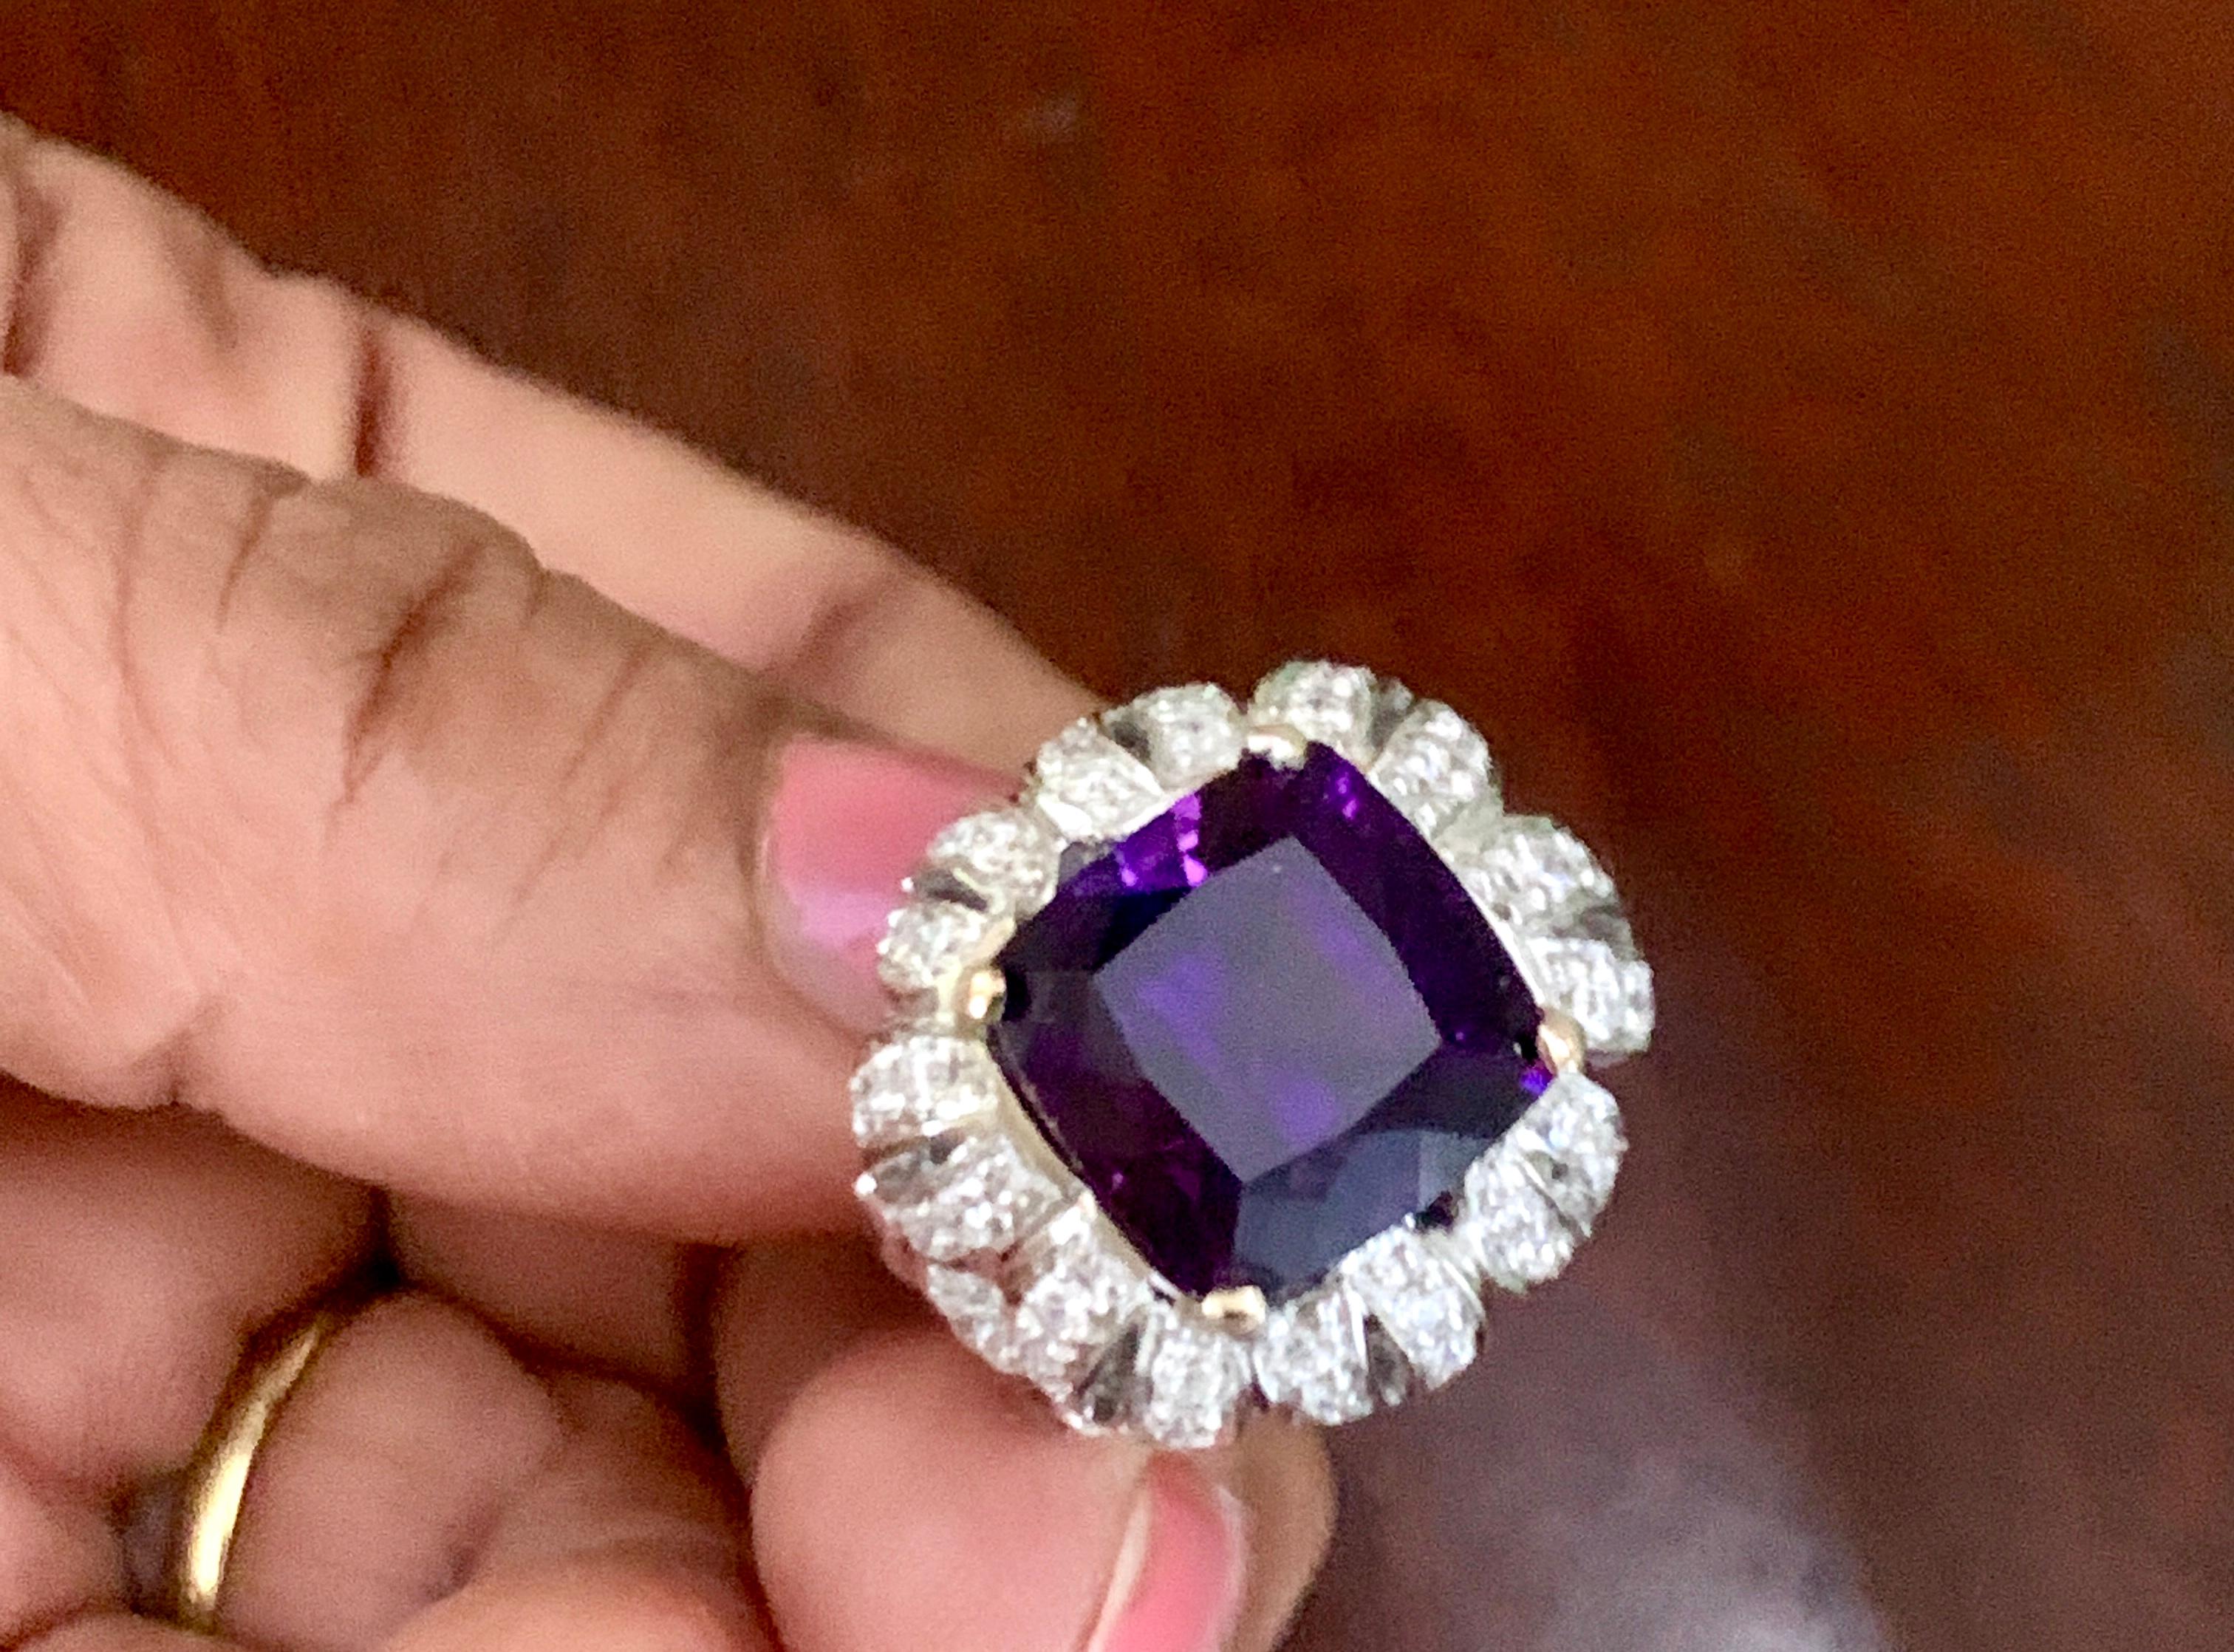 6.5 Carat Amethyst and 1.5 Carat Diamond  Ring 18 Karat White Gold, 1970s
This ring  has a 6.5 carat of high quality i mean finest  Amethyst . Color and clarity is extremely  nice
Surrounded by  diamonds weighing  1.50 ct in a beautiful